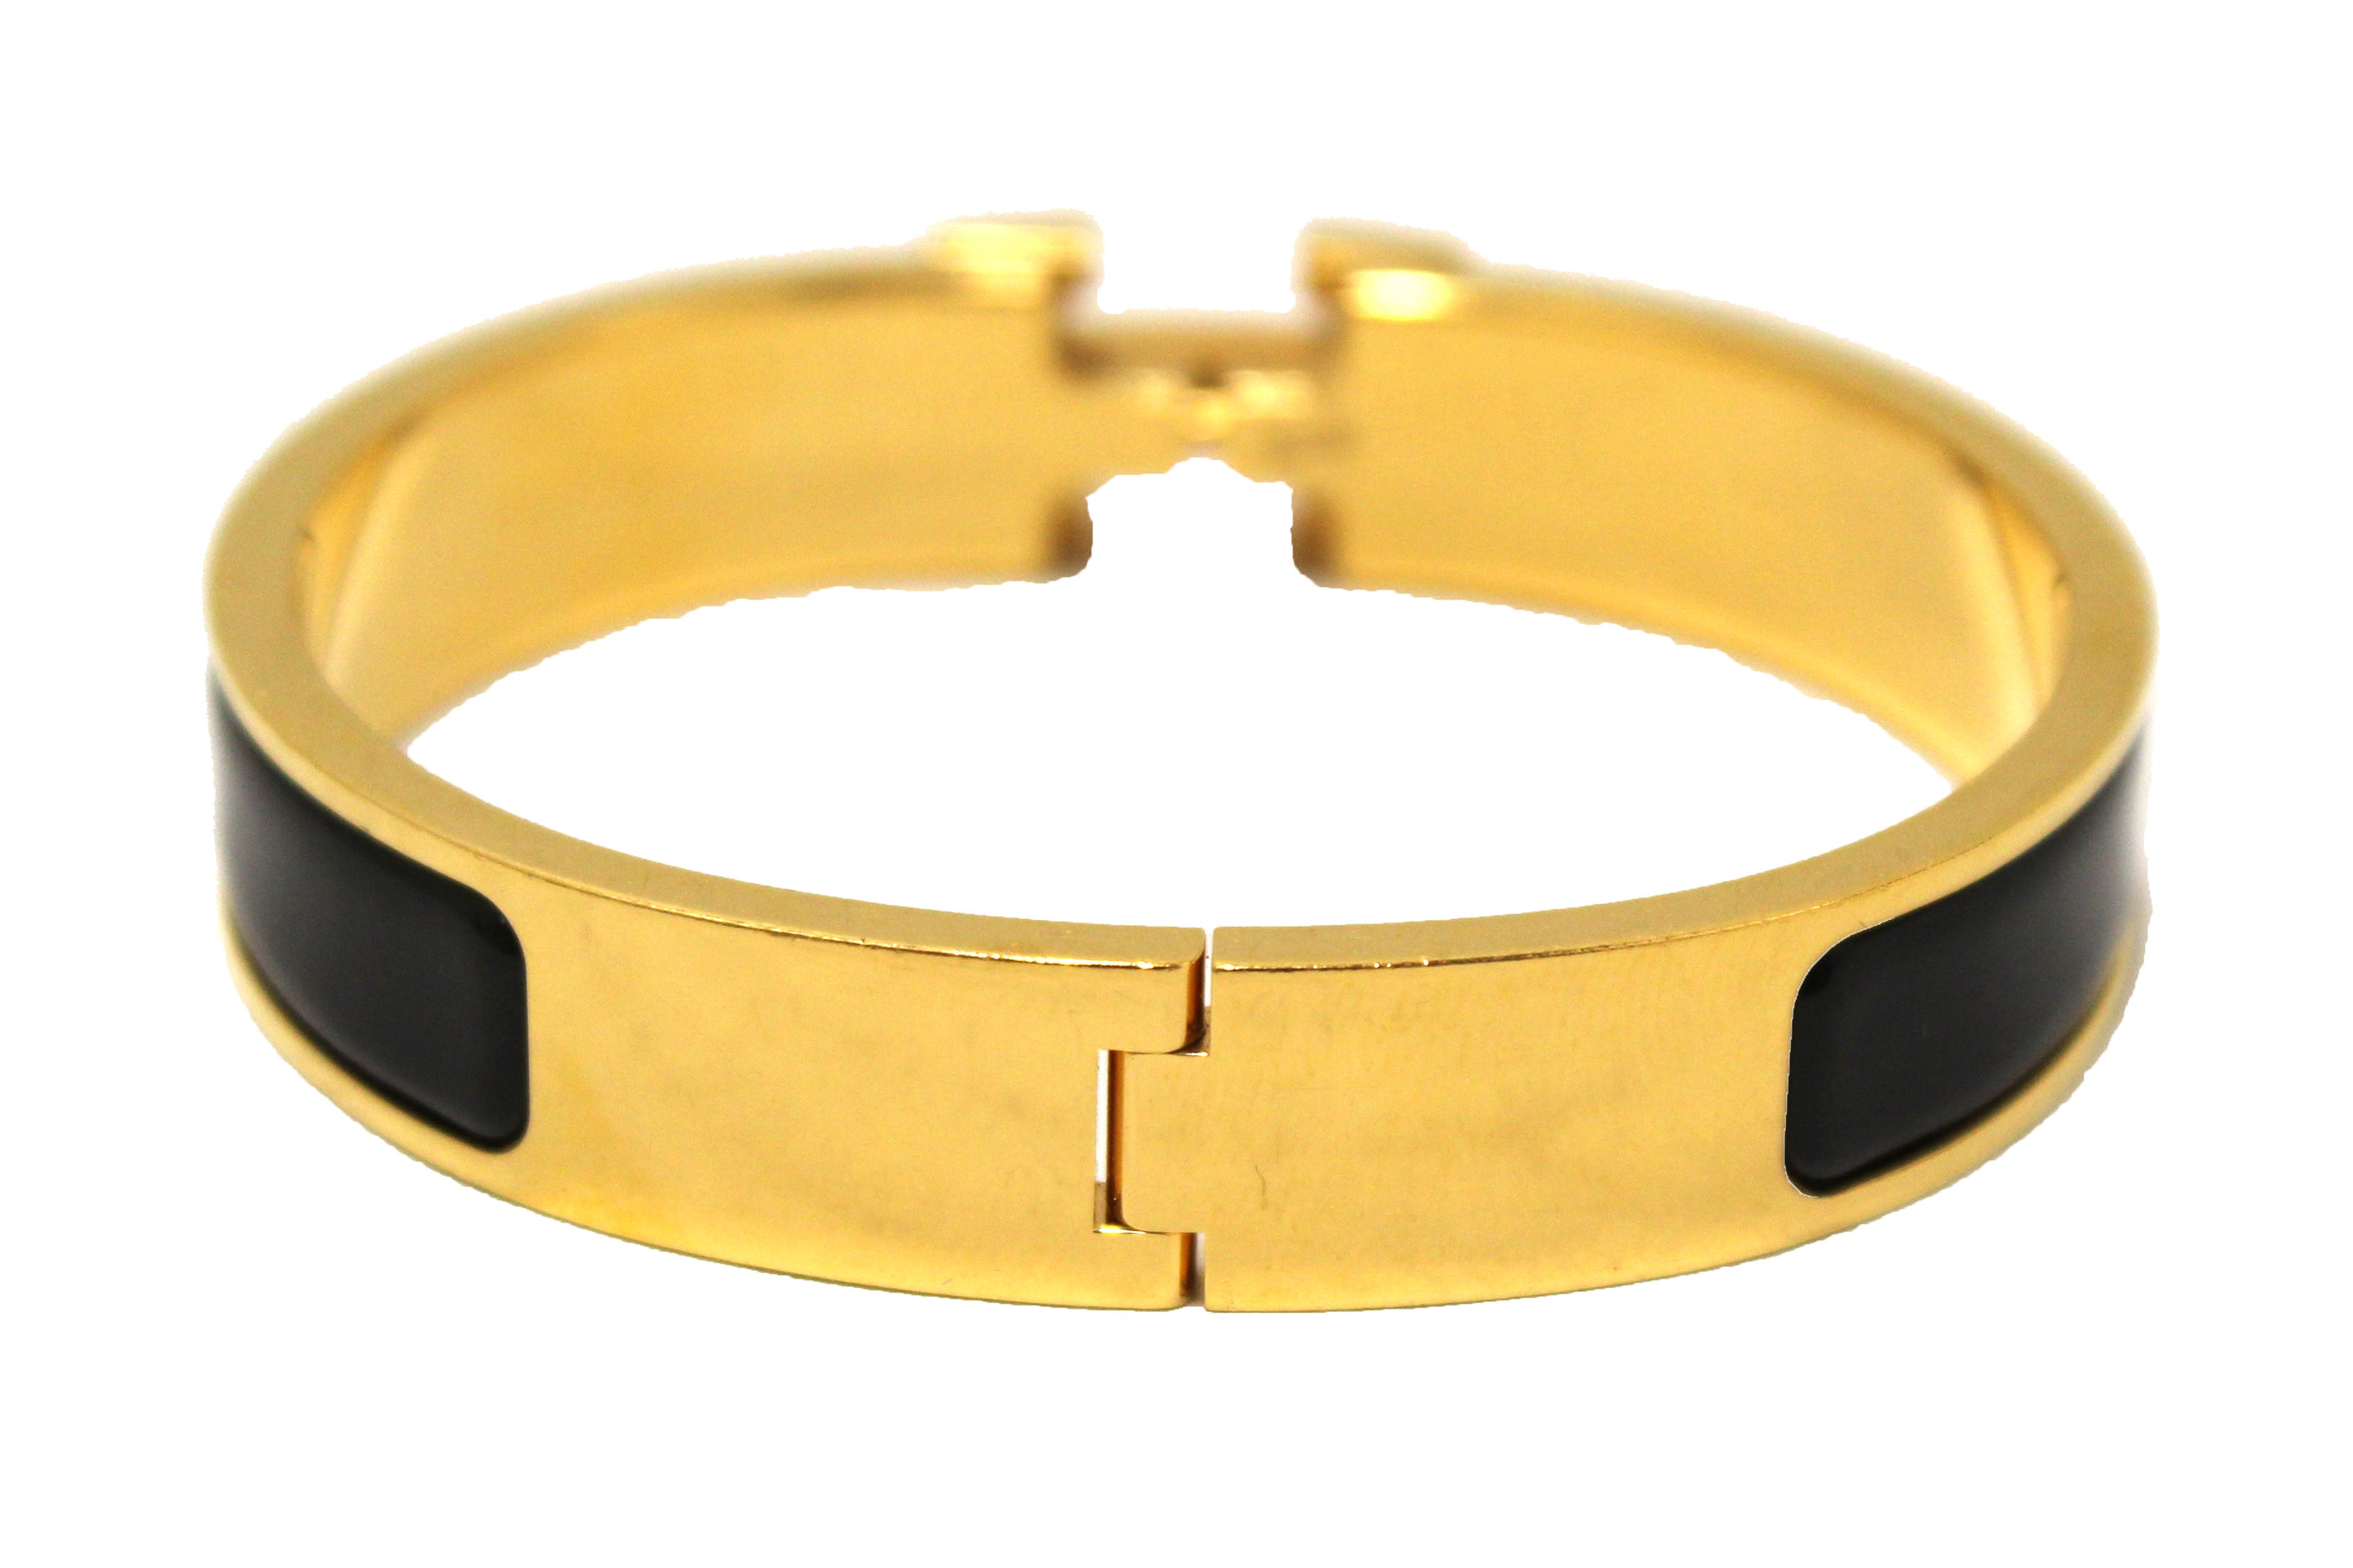 Authentic Hermes Black Enamel With Gold Plated Clic Clac H PM Bangle